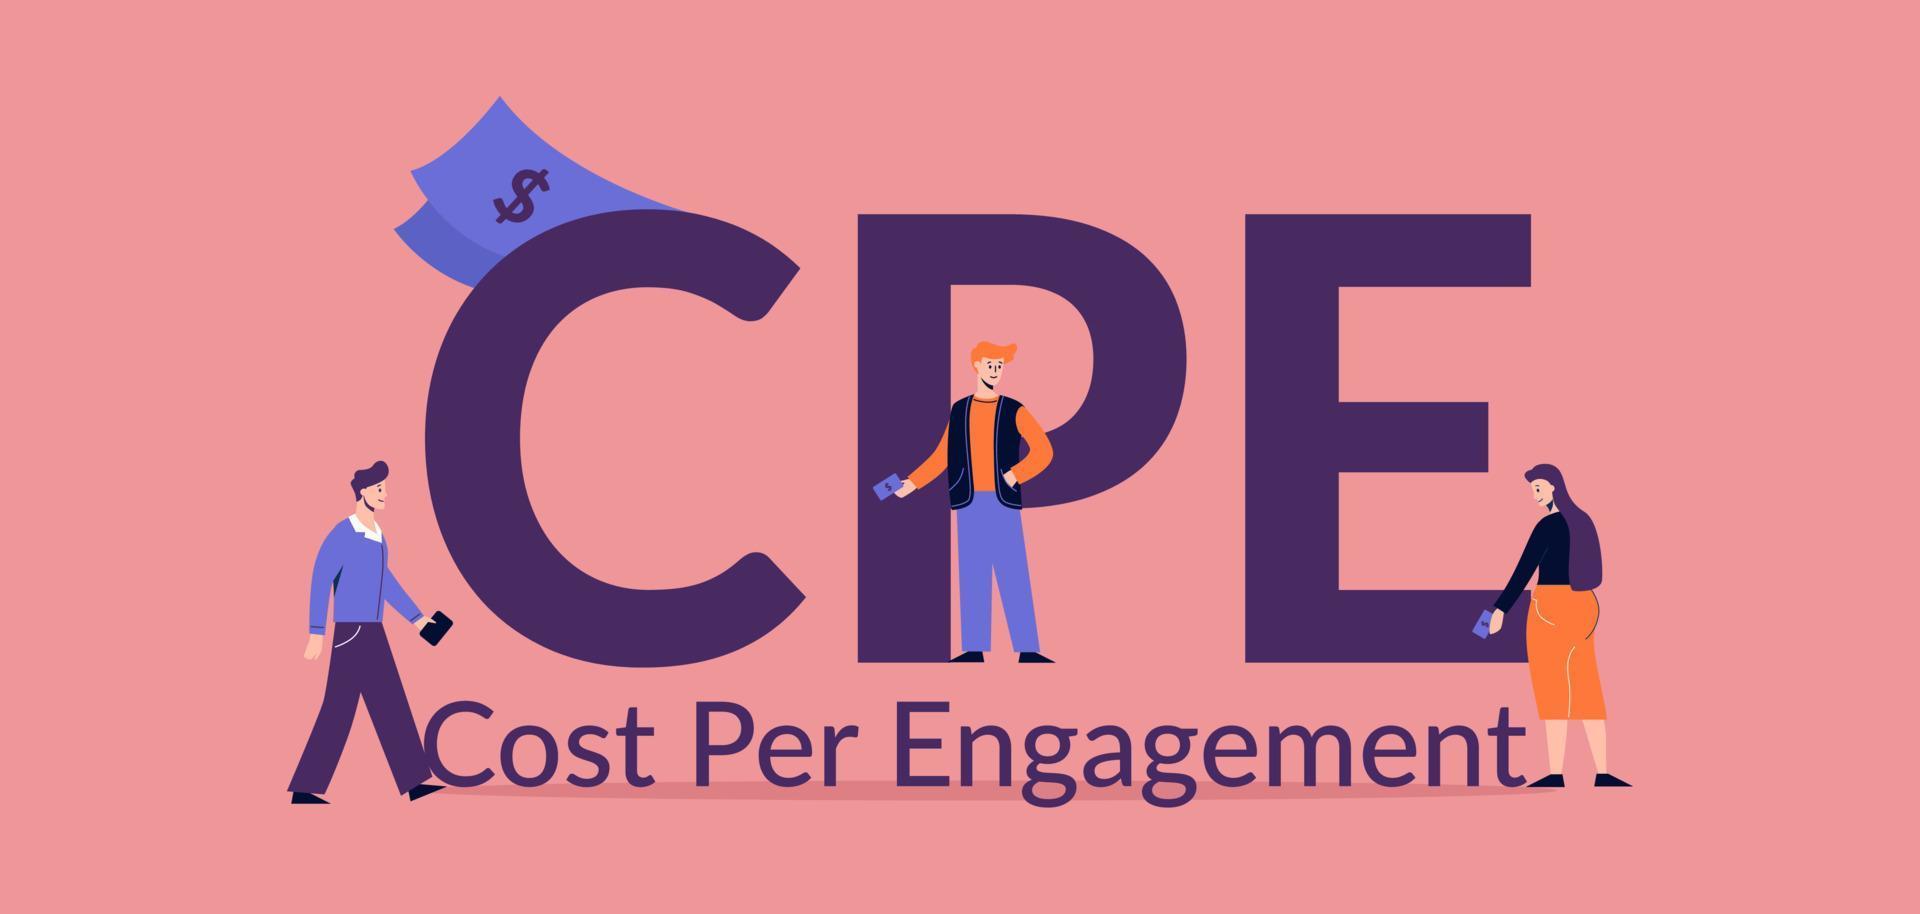 CPE cost per engagement illustration. Marketing advertising promotion business optimization electronic web management service with monetary strategy and paid vector information.